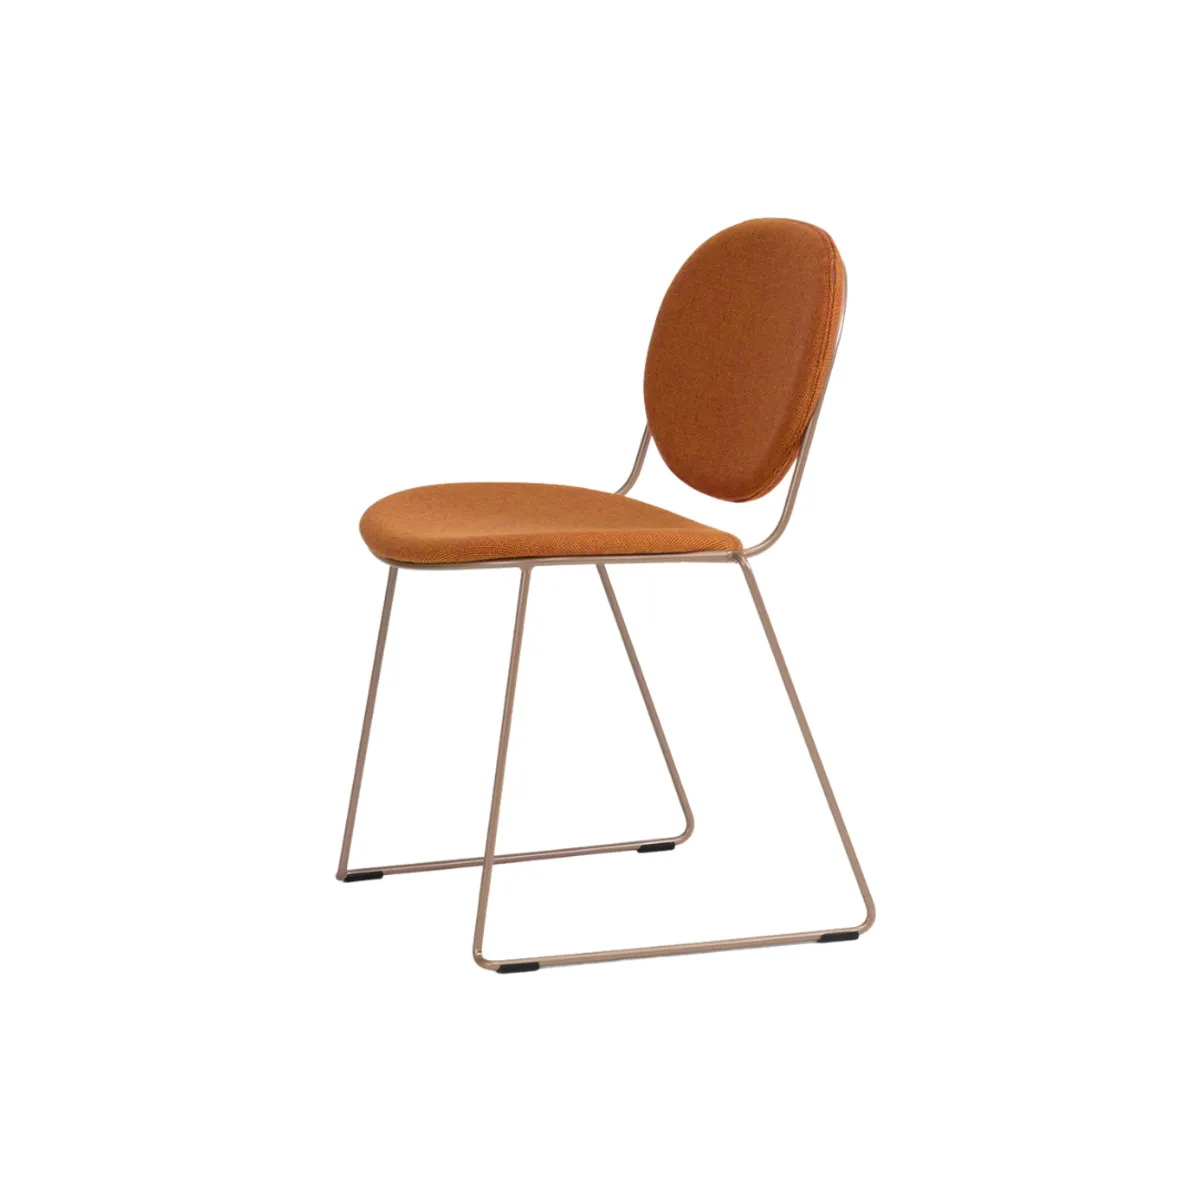 Timo stacking chair 6